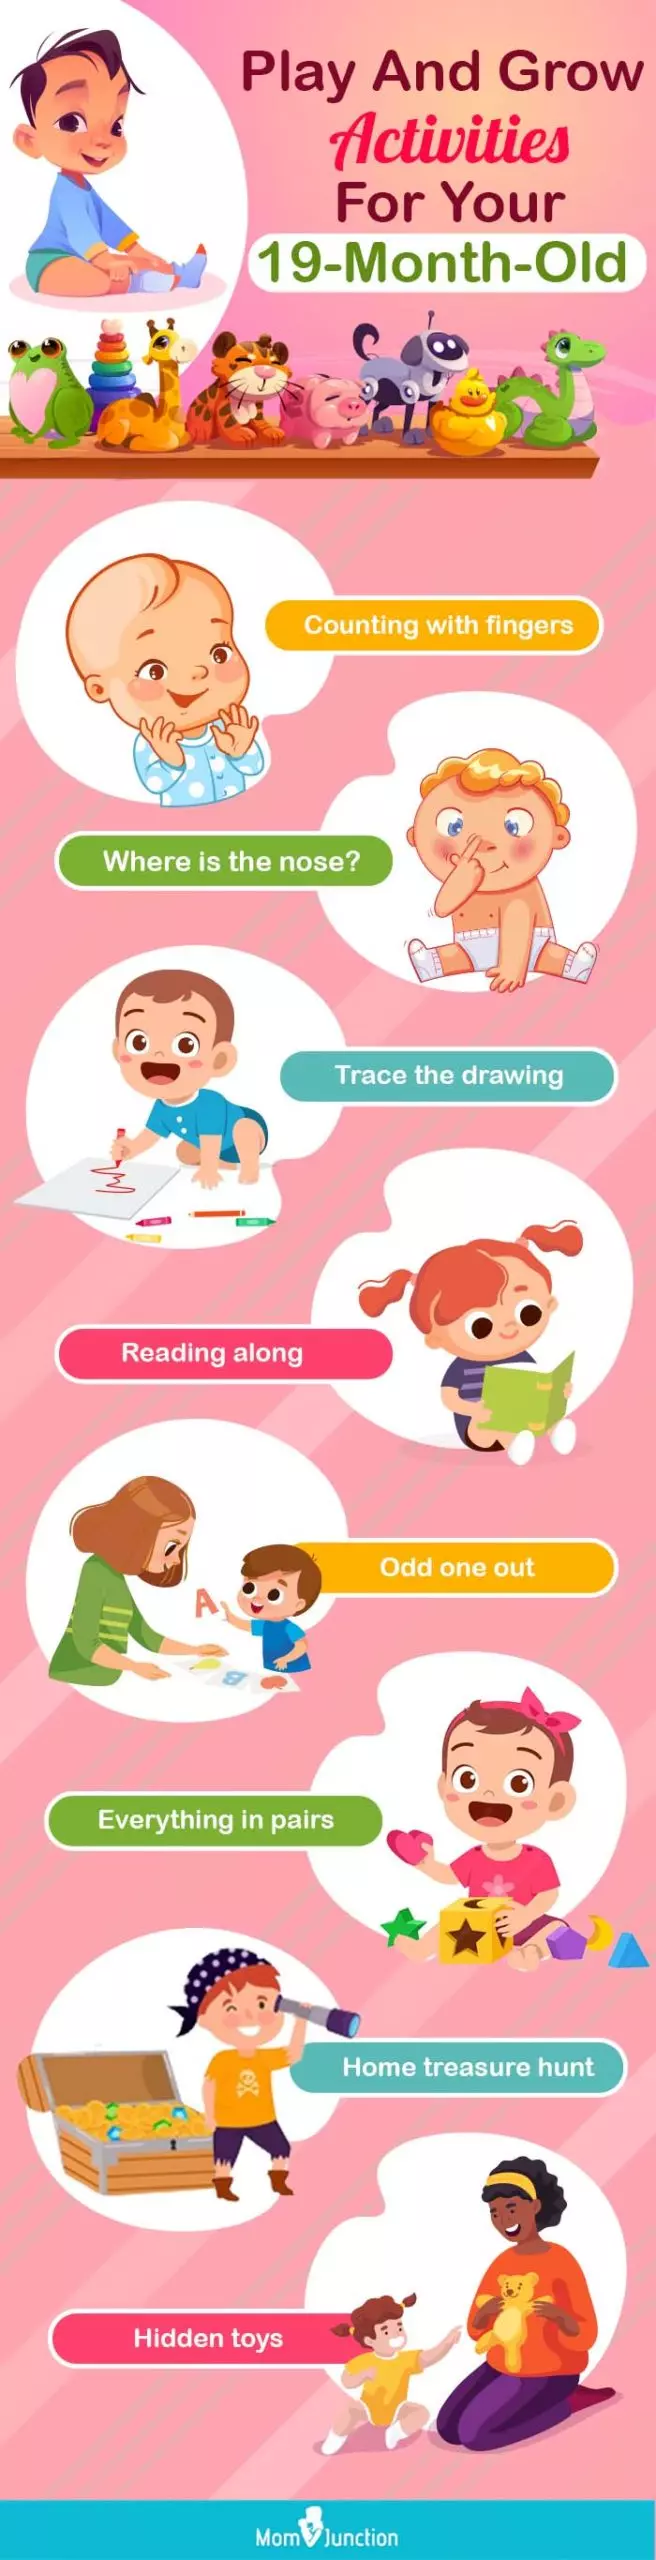 play and grow activities for your 19-month-old (infographic)